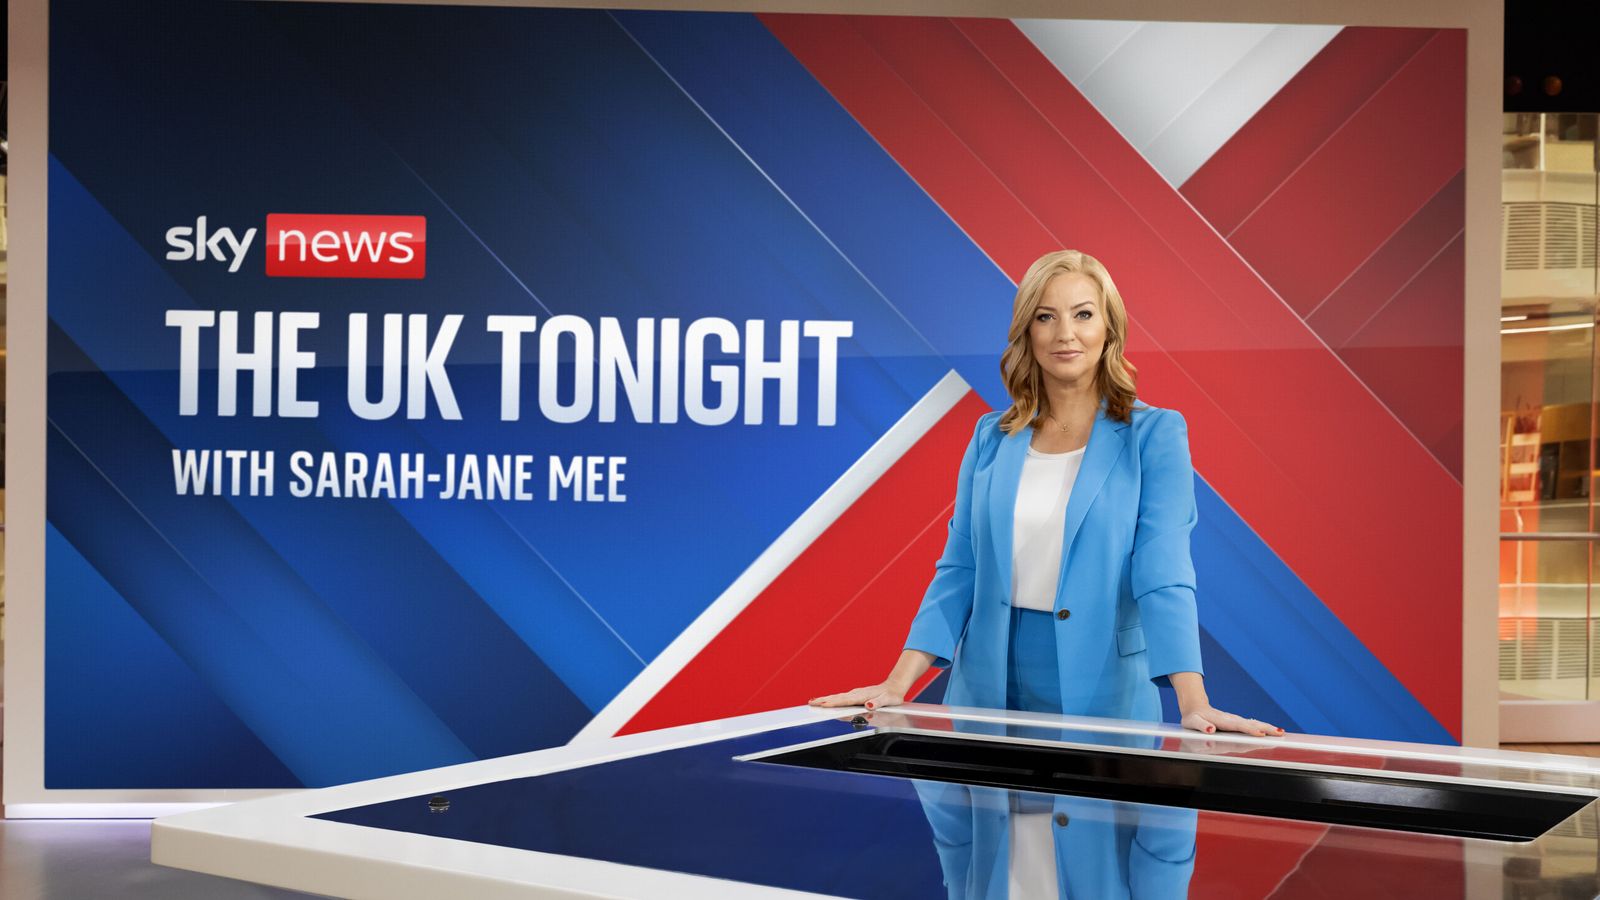 What's happening inside the 'broken' prison system? Find out on The UK Tonight with Sarah-Jane Mee